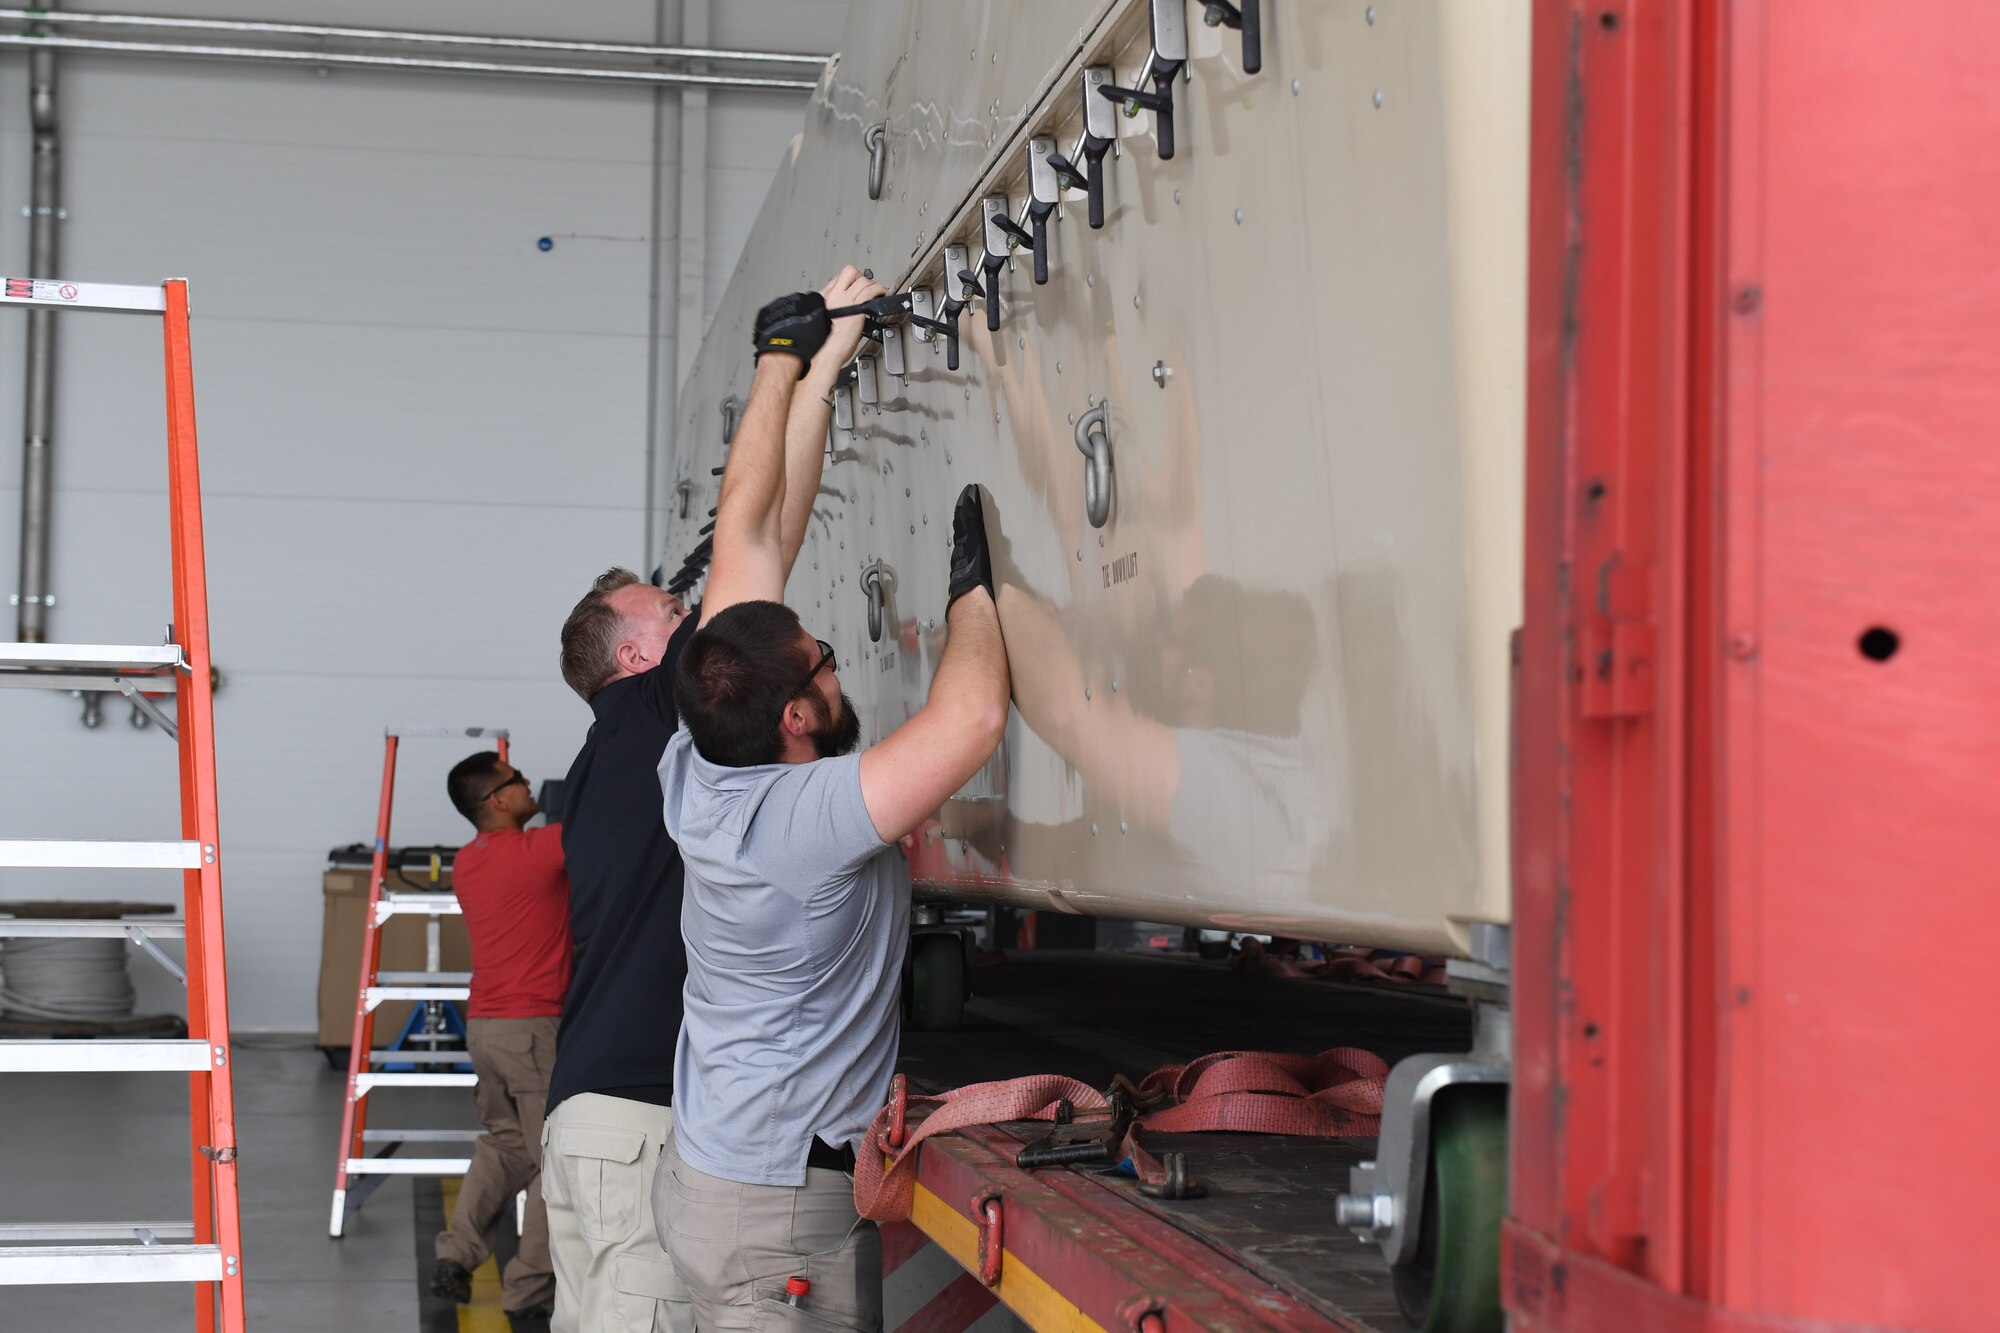 General Atomic contractors prepare to unload an MQ-9 Reaper from its container at Amari Air Base, Estonia, June 29, 2020. One of the aircraft was transported via cargo truck from Miroslawiec AB, where it was then offloaded and assembled in a hangar at Amari. (U.S. Air Force photo by Airman 1st Class Alison Stewart)